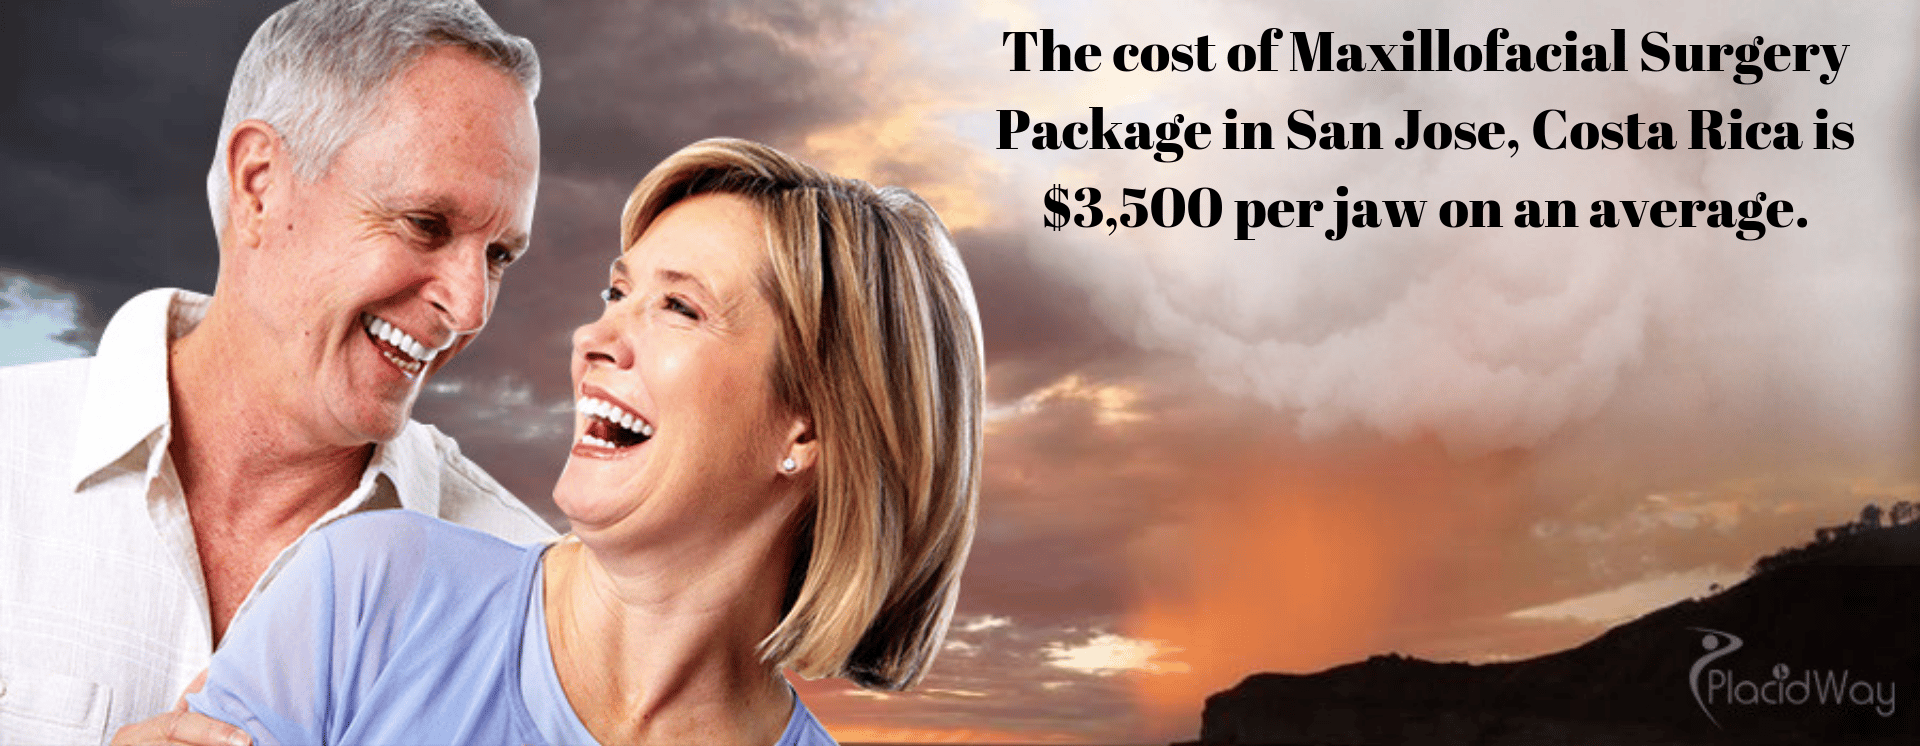 The cost of Maxillofacial Surgery Package in San Jose, Costa Rica is $3,500 per jaw on an average.